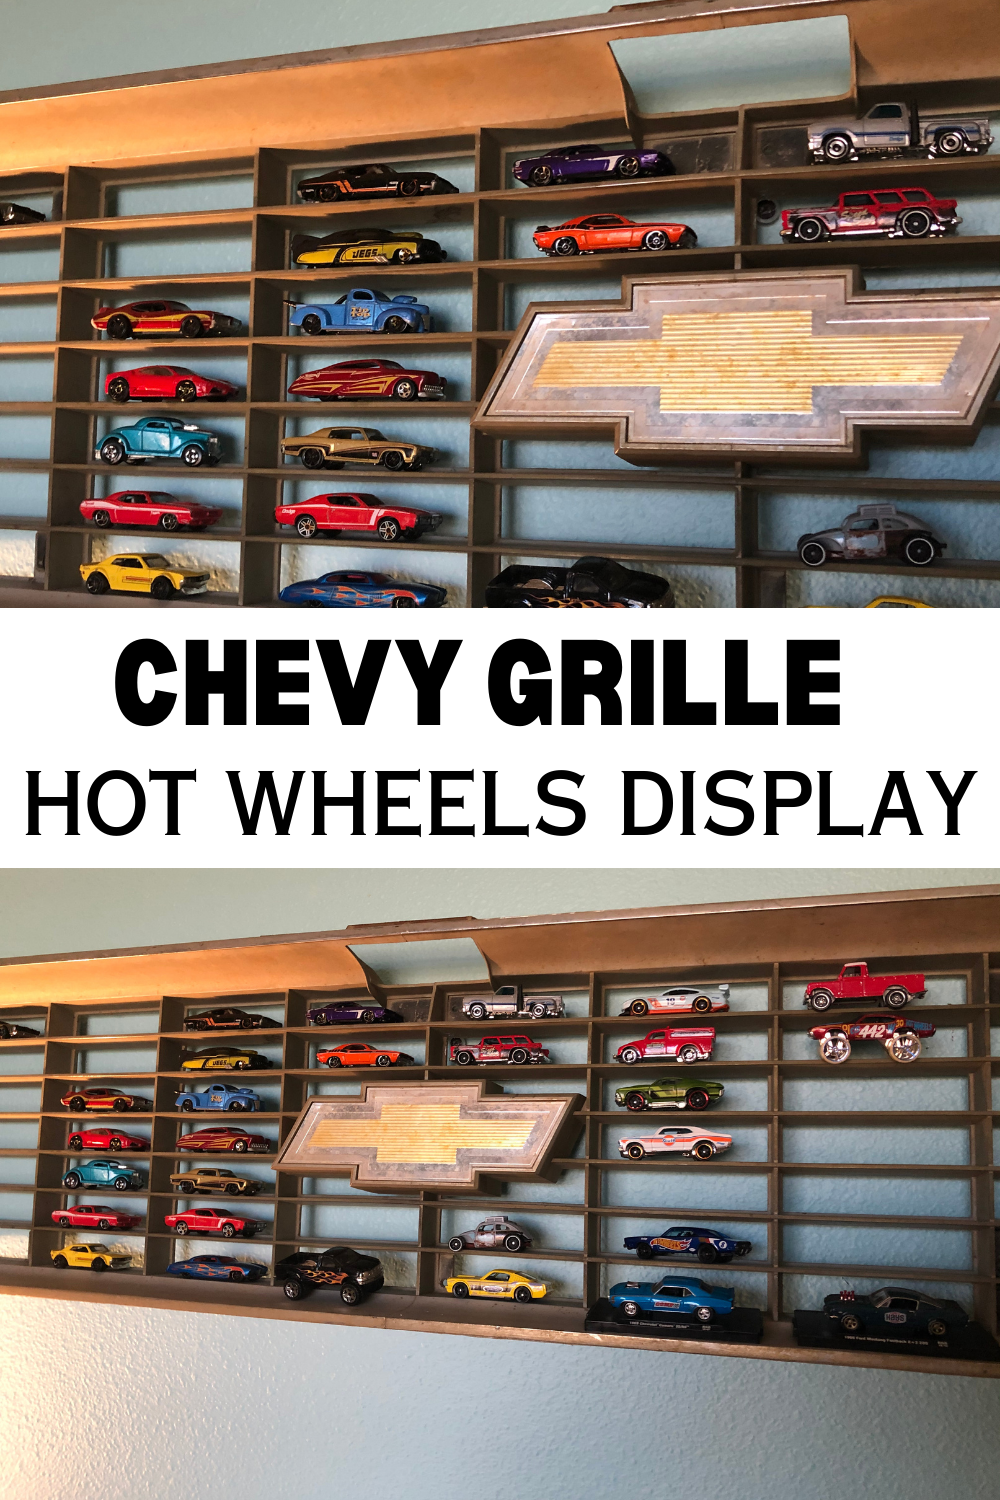 Have you priced a Hot Wheels Display lately? Look no further than an egg-crate grille from a 73-87 Chevy half-ton pickup. Use it to display your ever-growing Hot Wheels collection!